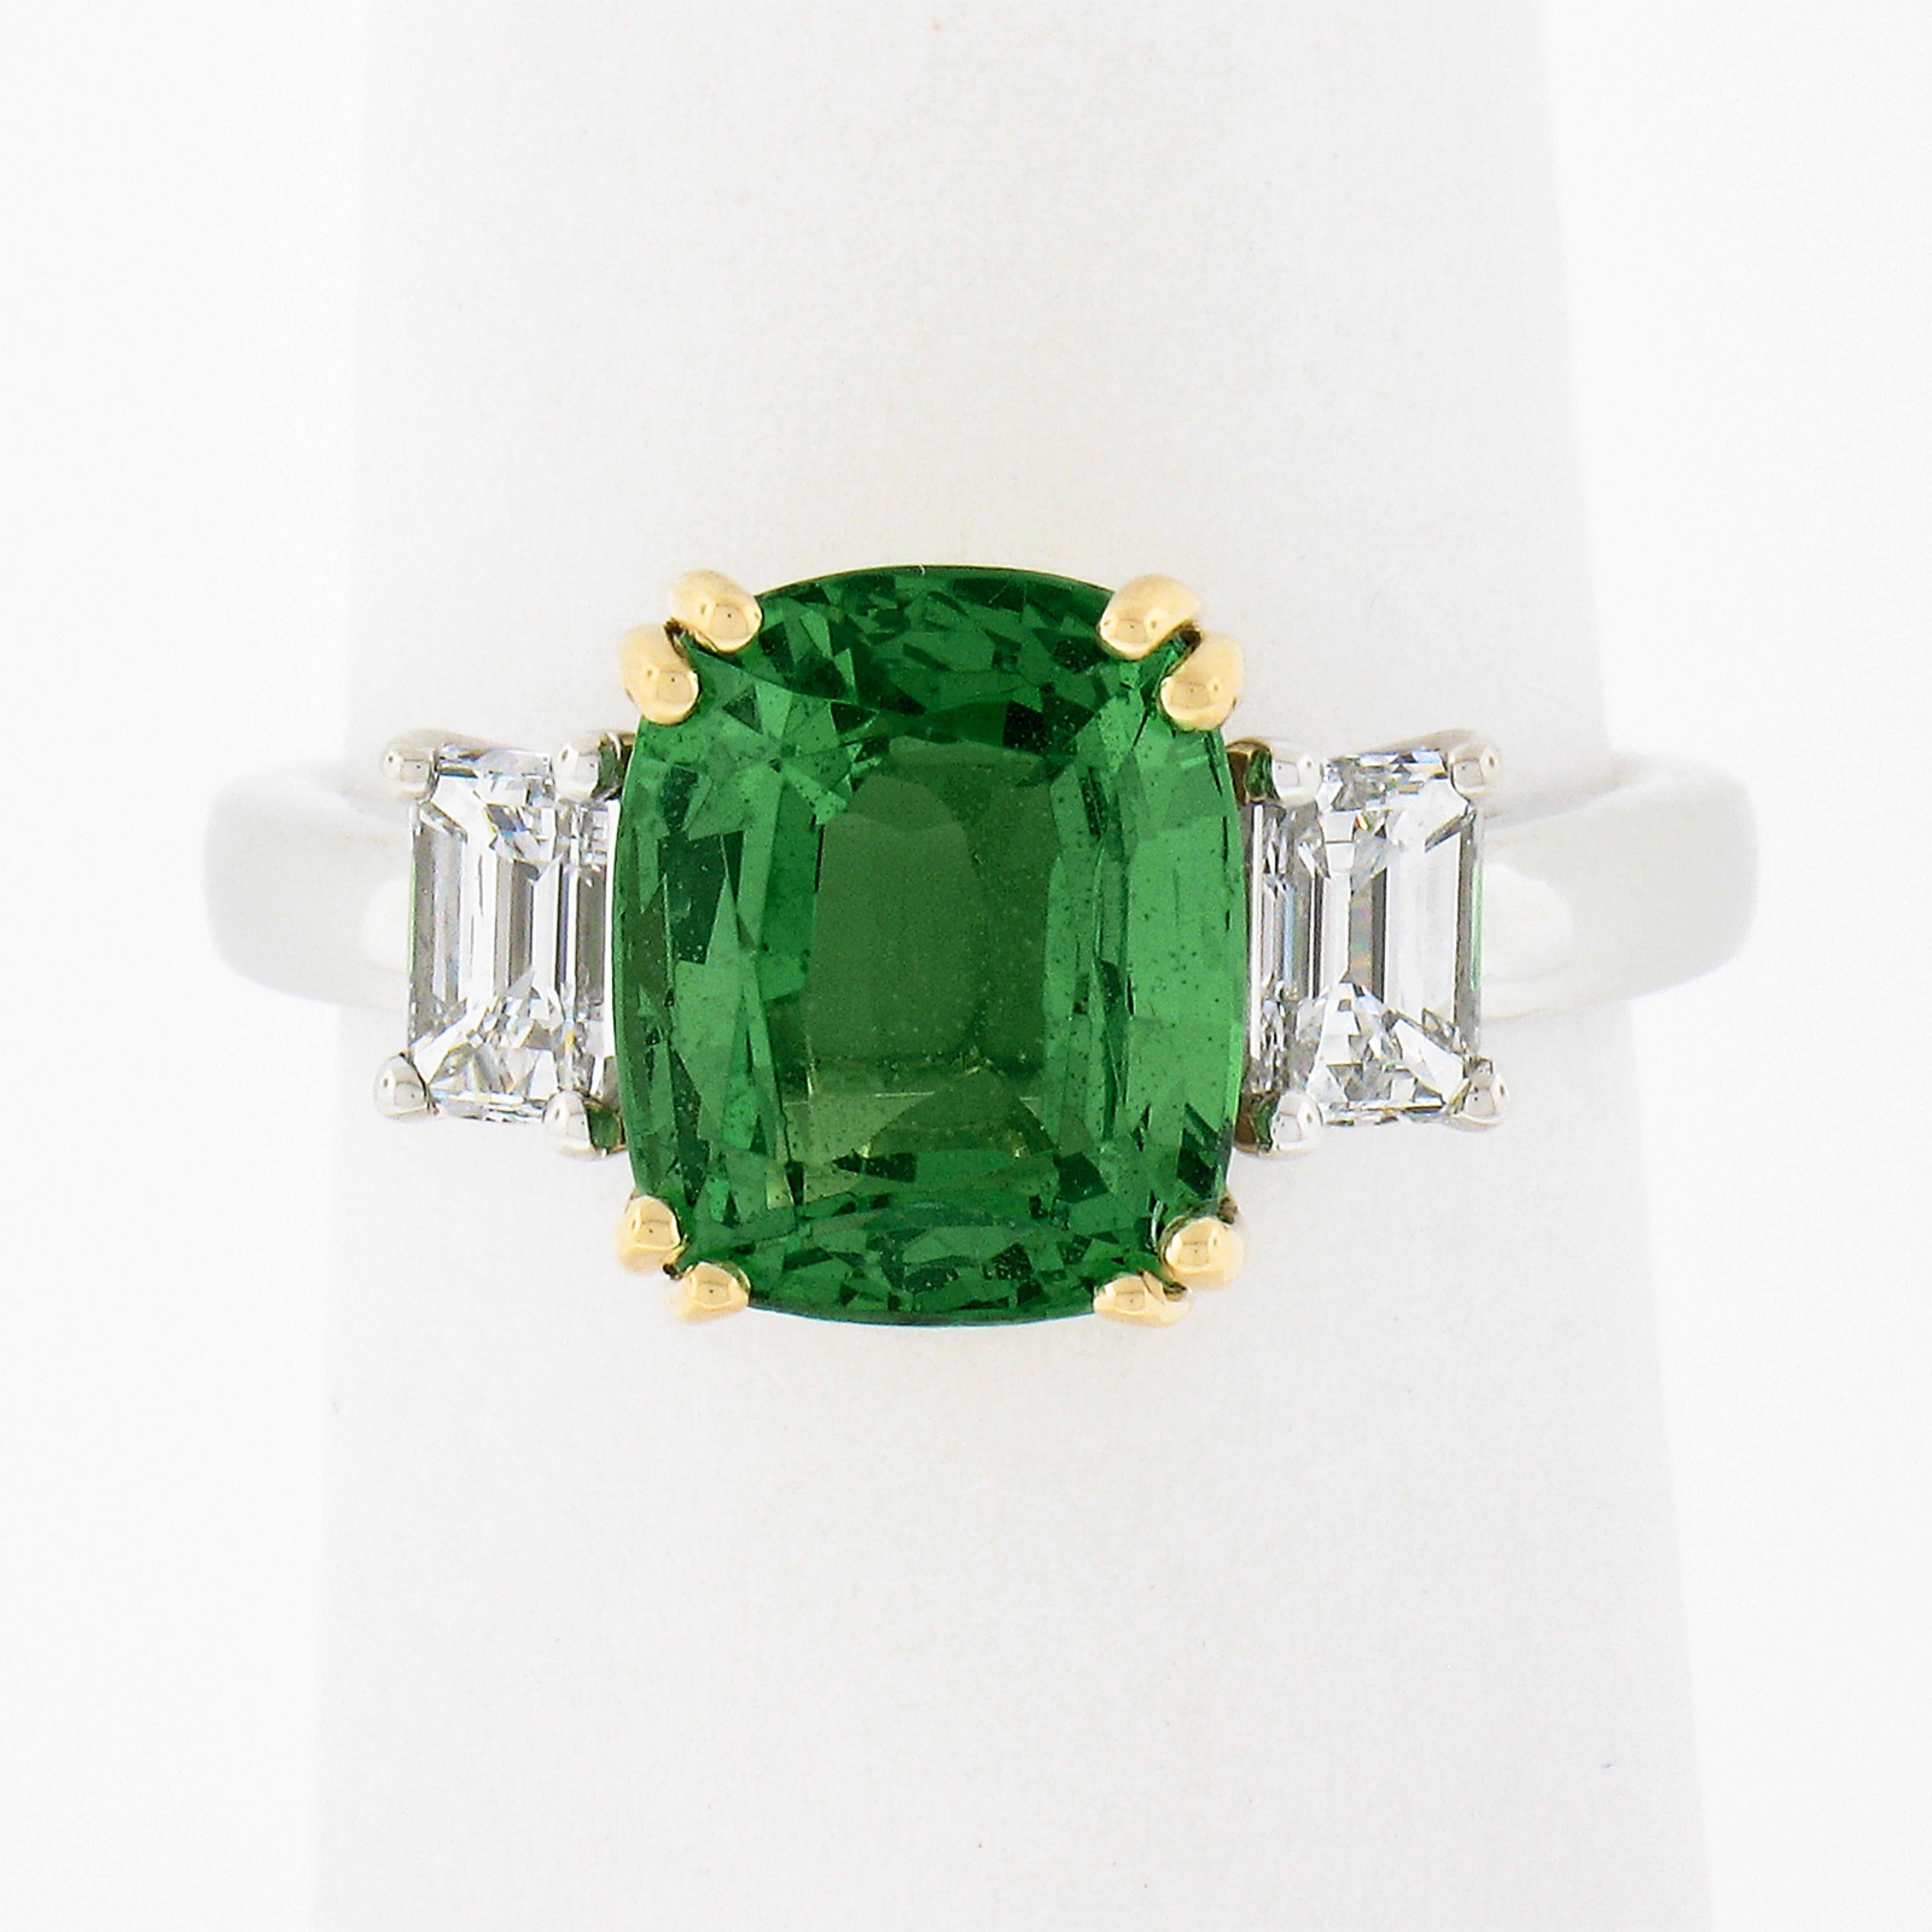 This fancy and truly fine quality green tsavorite and diamond custom made ring is crafted in solid platinum with a solid 18k yellow gold center basket setting. The ring features a natural, GIA certified, cushion cut green tsavorite that weighs